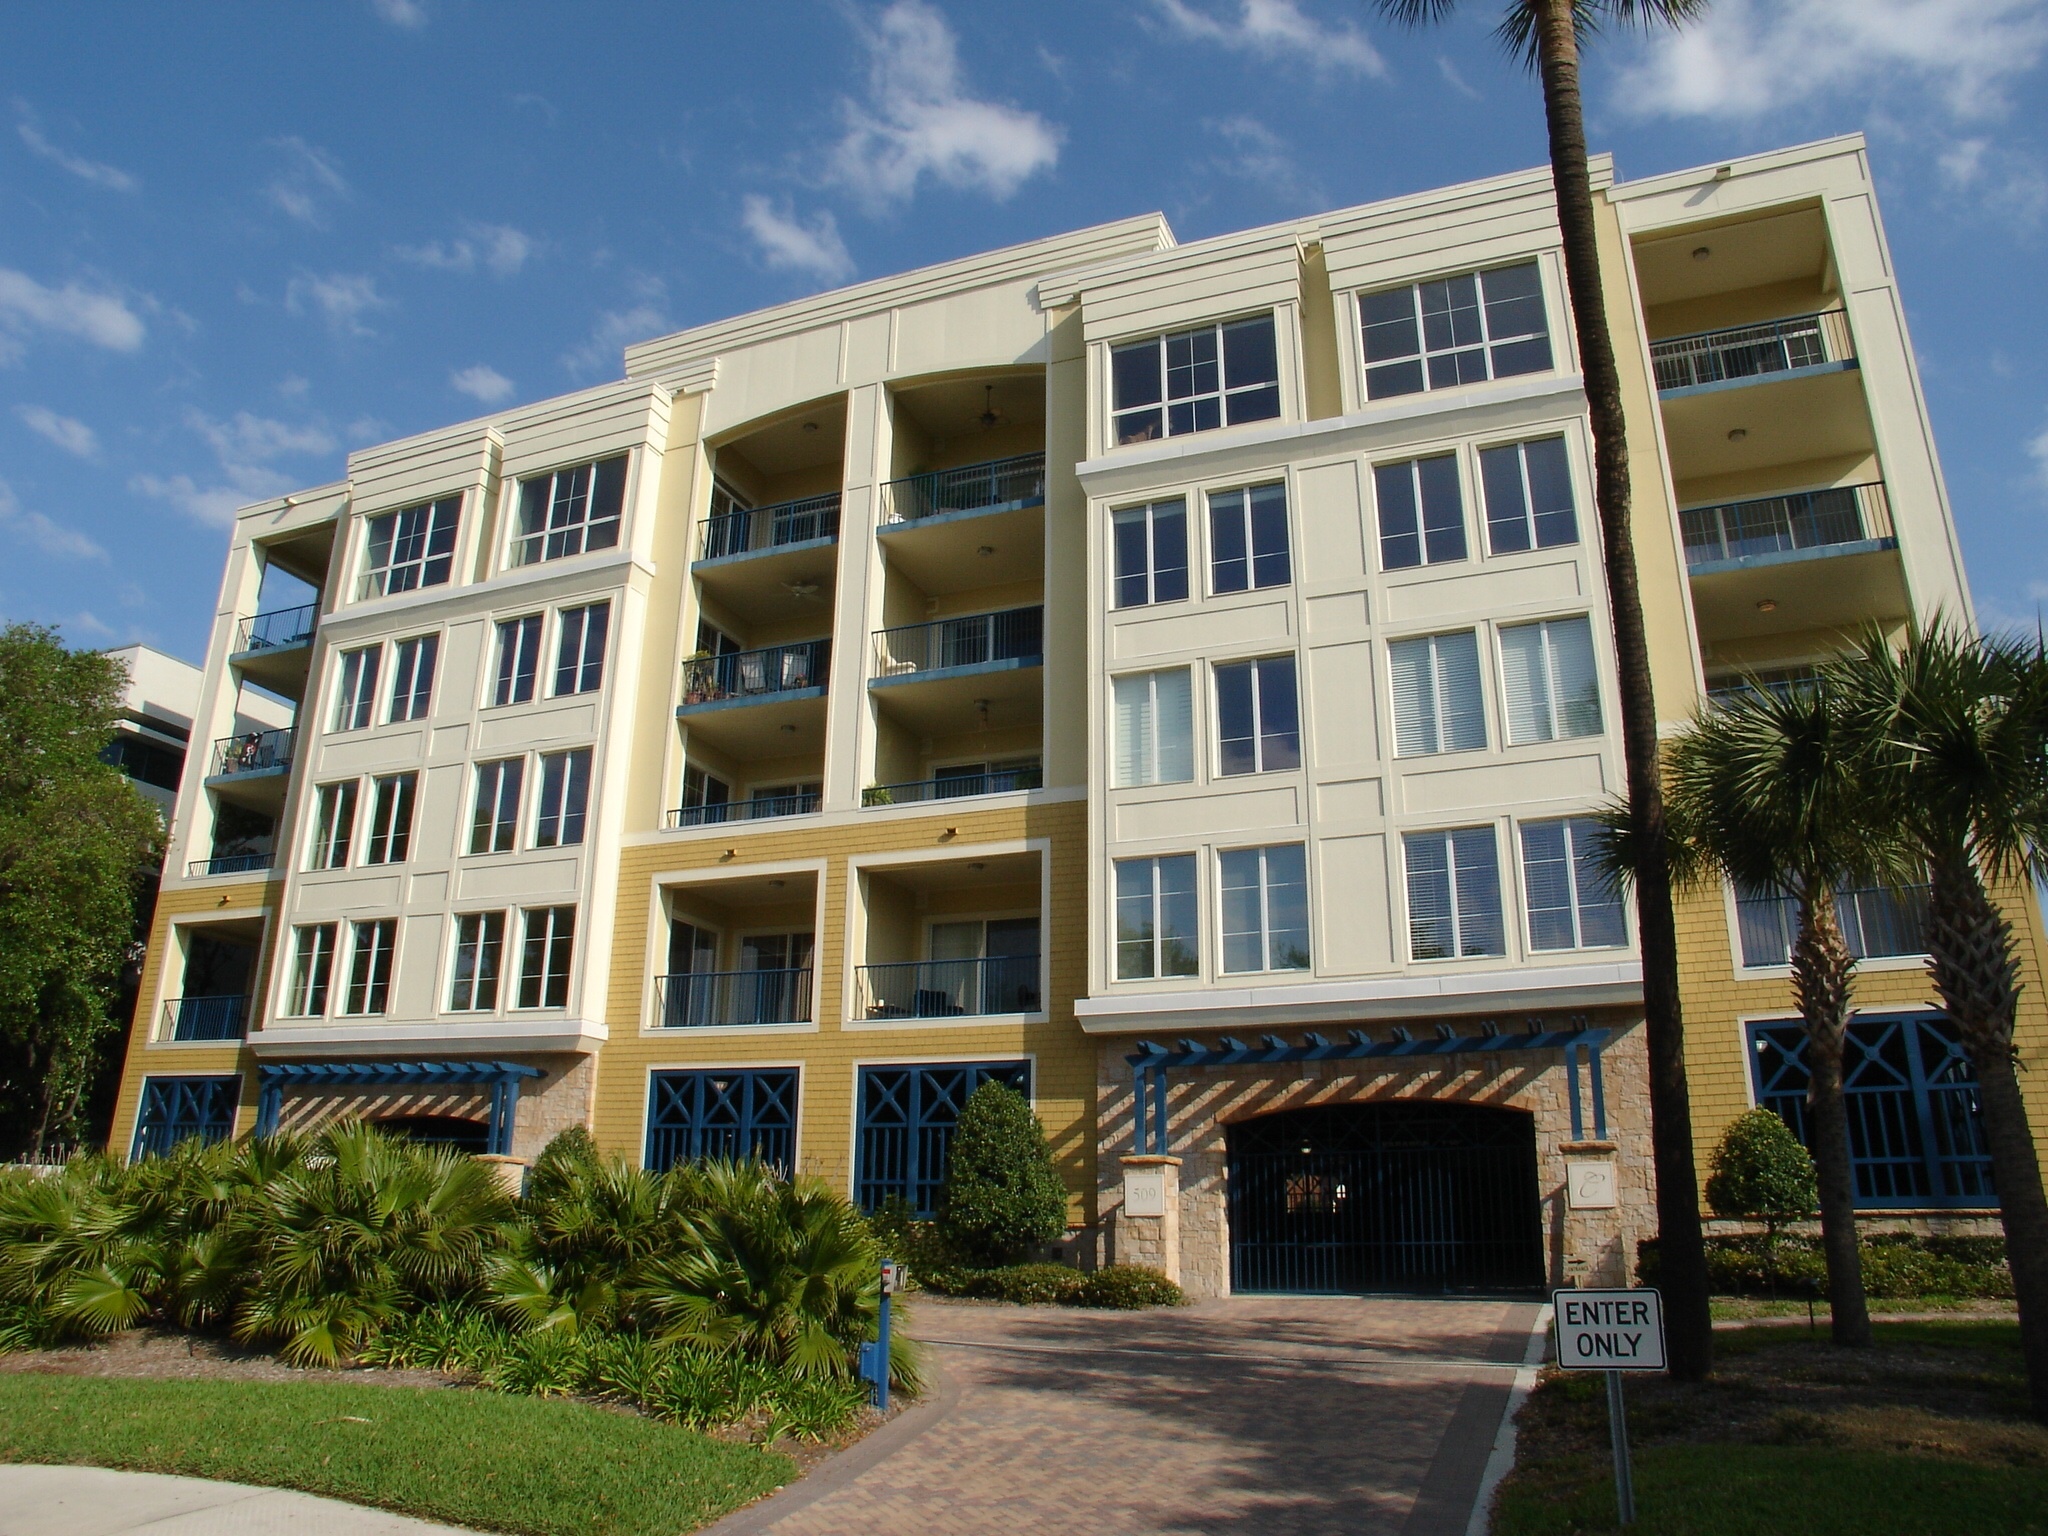 Christiansted, Hyde Park, Florida Condos for Sale in Tampa